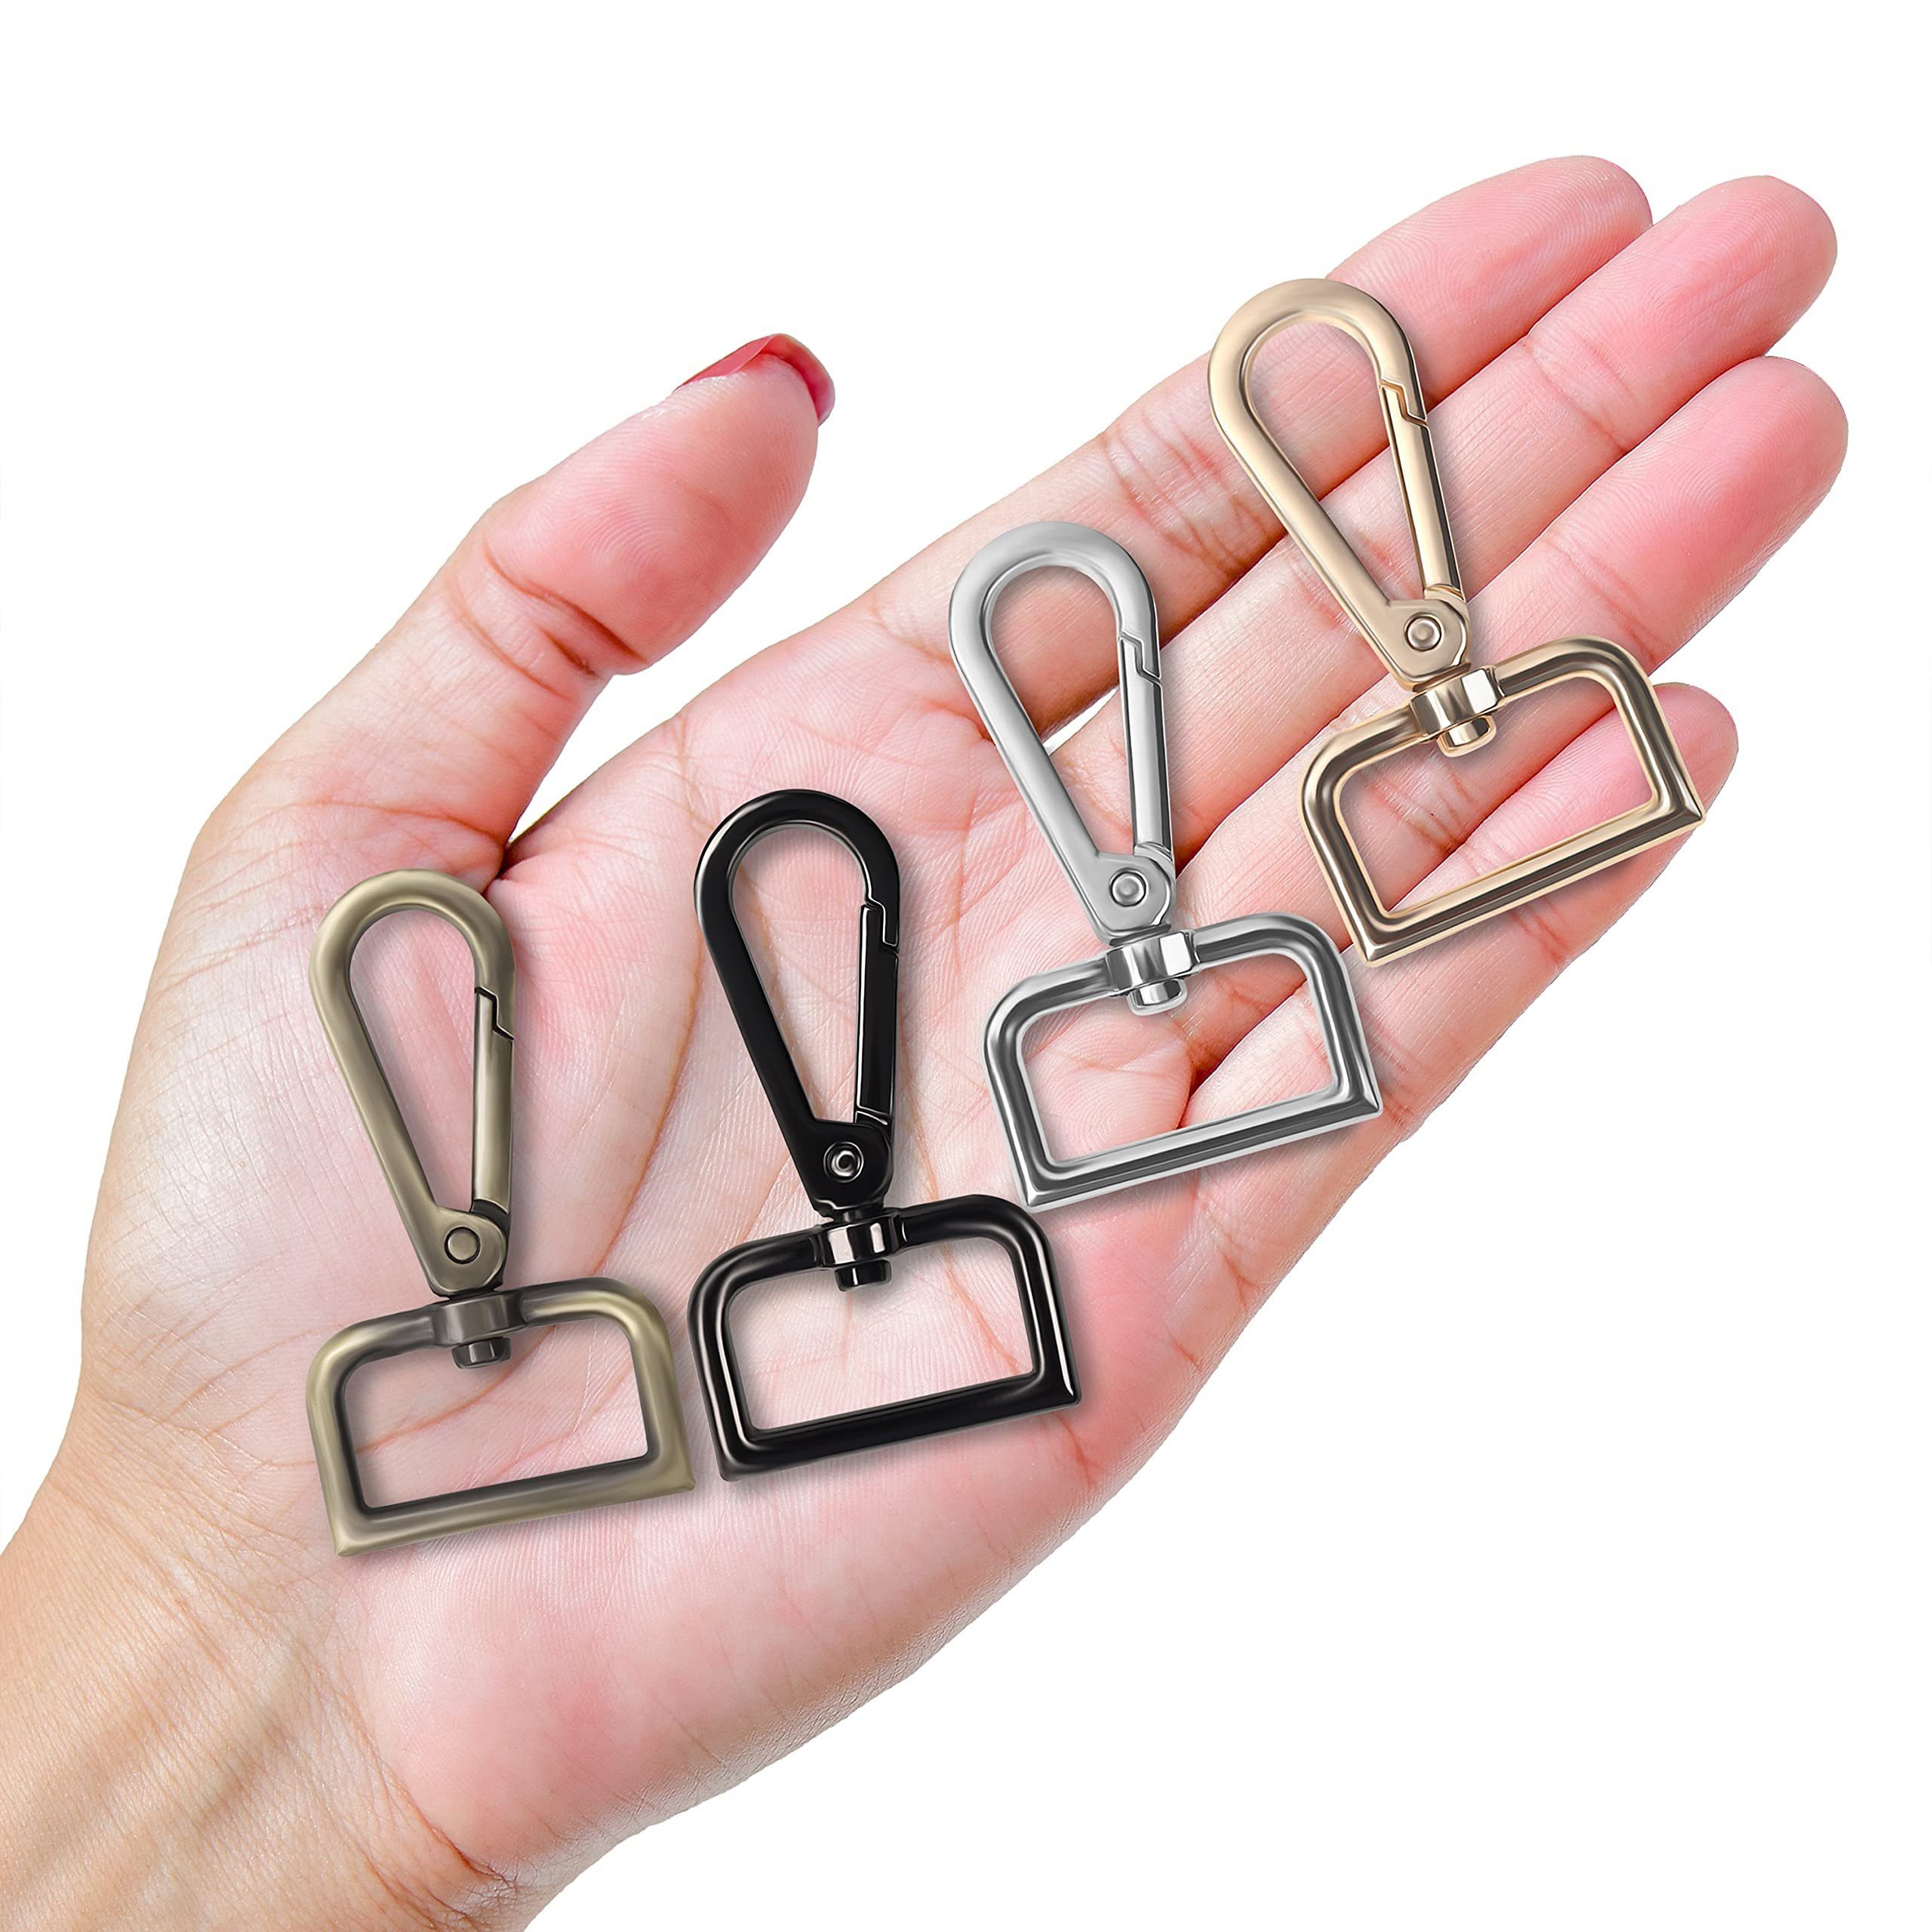 D-Ring Metall, (16-Pack), Hook with Metal (16 Belle Keychain Vous Pack) with Keychain Metal D Hooks Rundstahlkette Ring